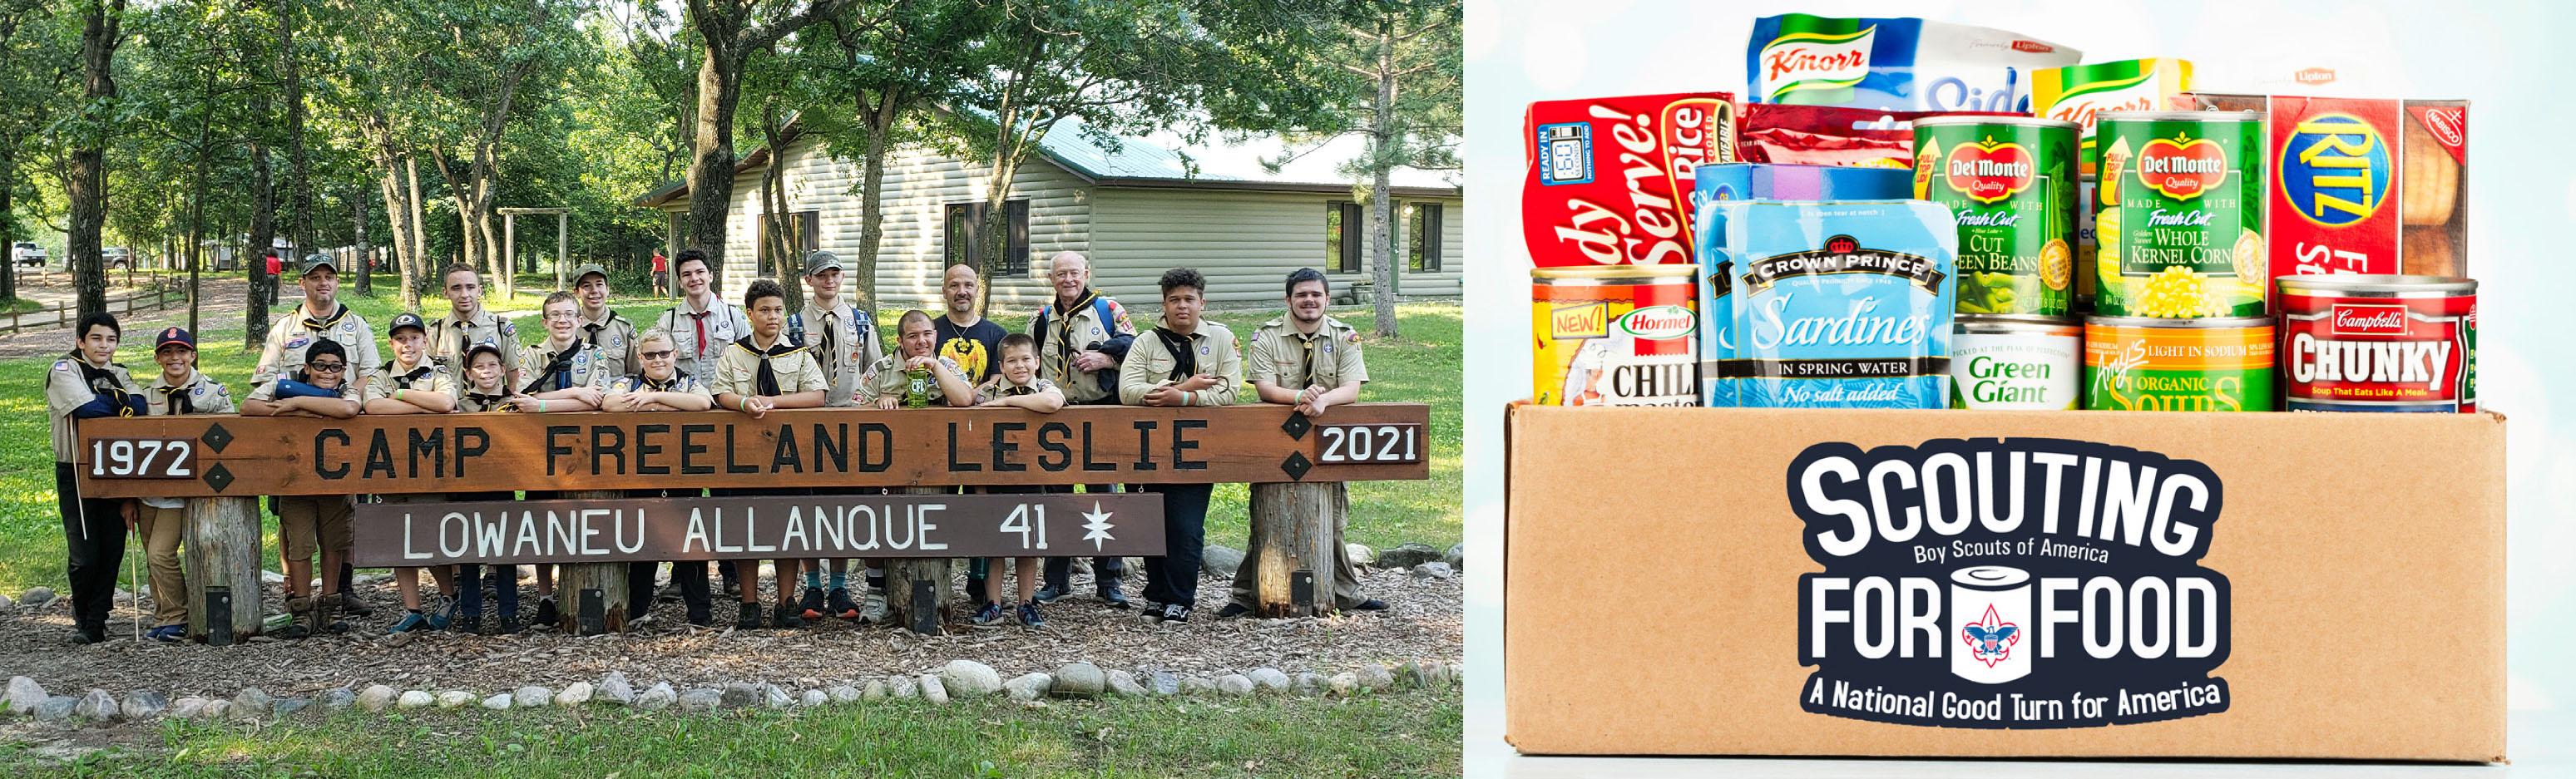 Addison Boy Scout Troop seeking food items to benefit Addison Township Food Pantry